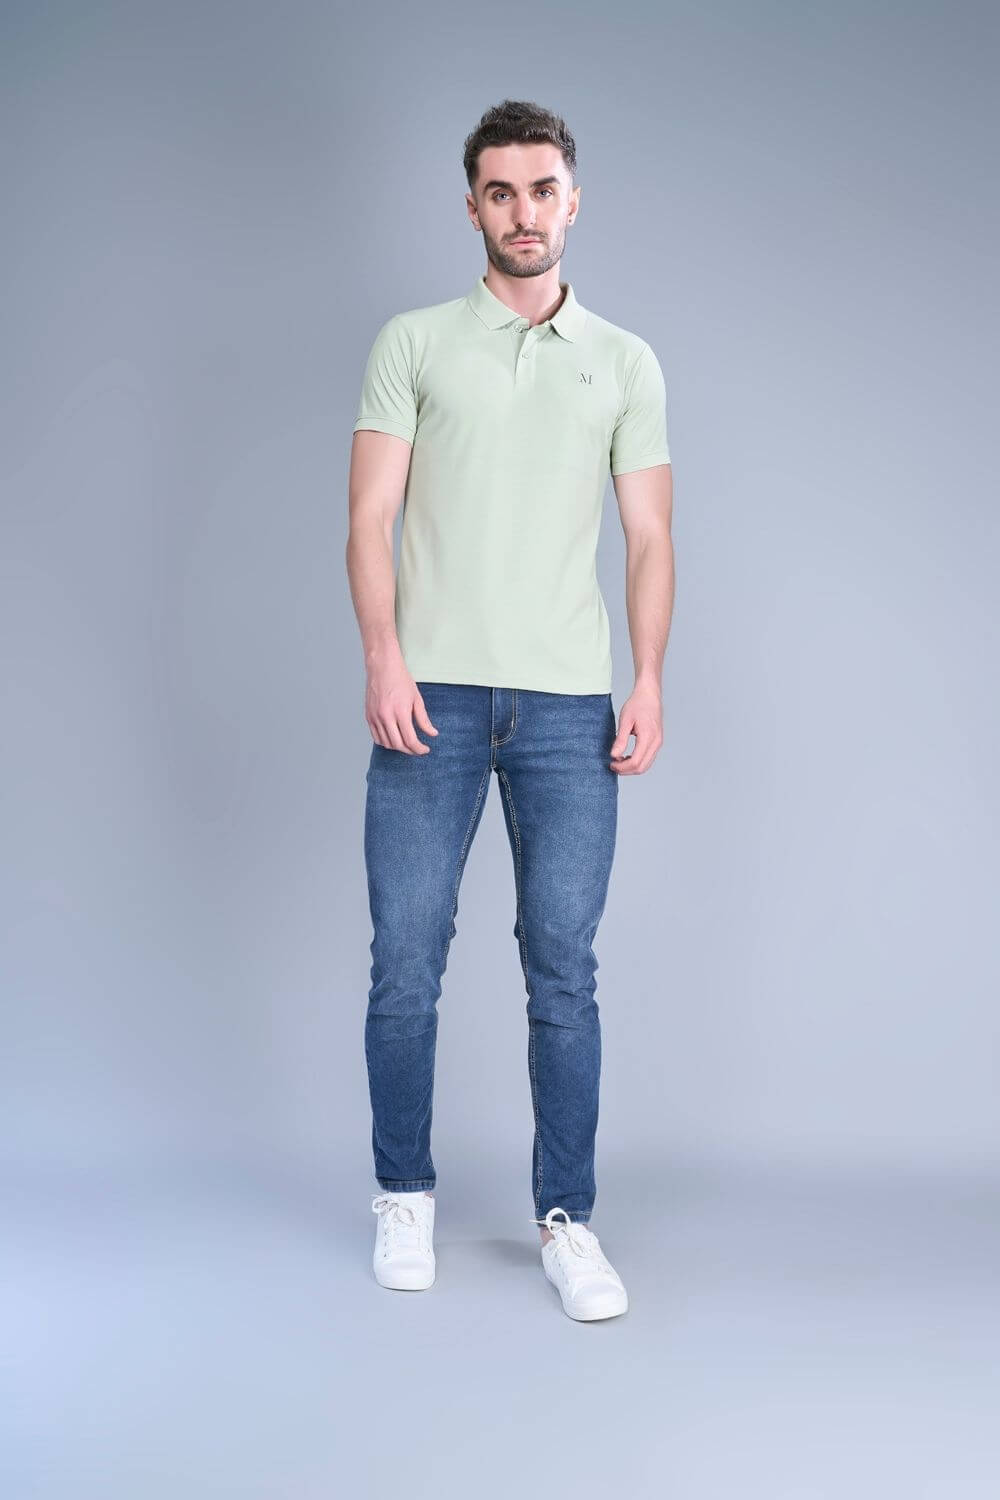 Spring Green colored, Smart Tech Polo T-shirts for men with collar and half sleeves.